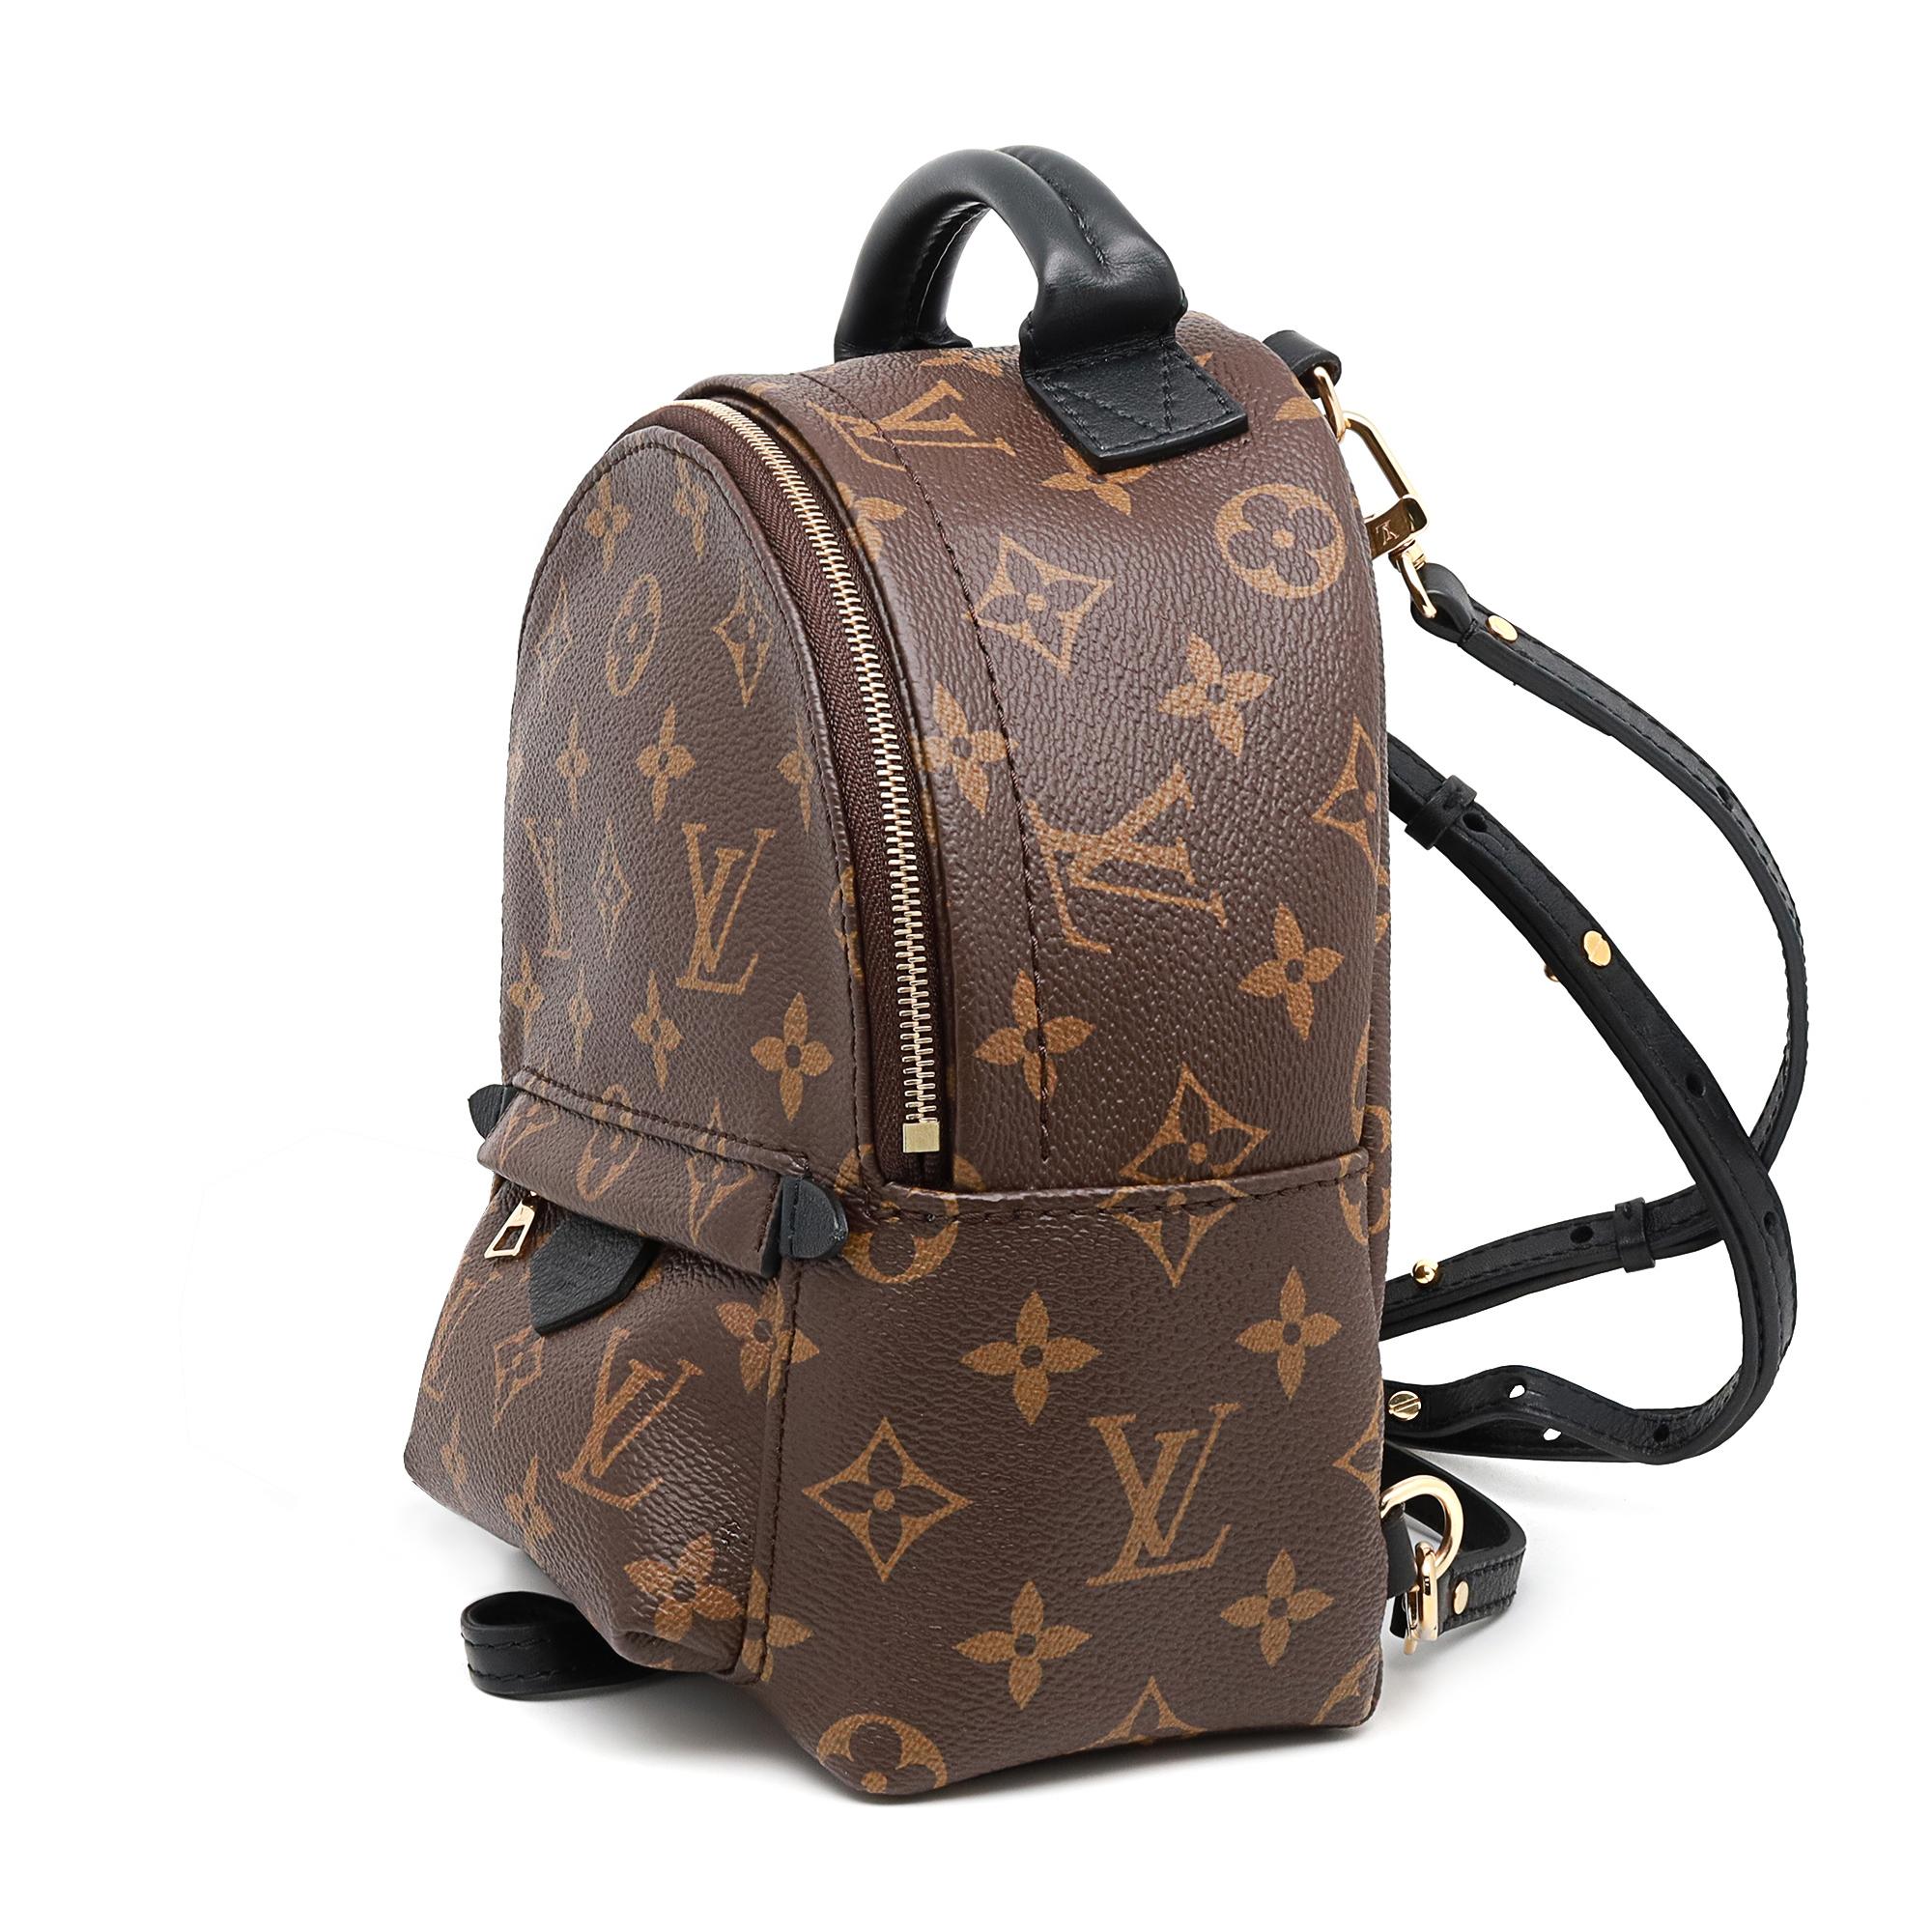 Louis Vuitton Monogram Palm Springs mini backpack. Featuring monogram coated brown canvas with black calfskin trim and a front zipped pocket. The backpack is reinforced with strong cowhide leather including a handle and adjustable leather shoulder